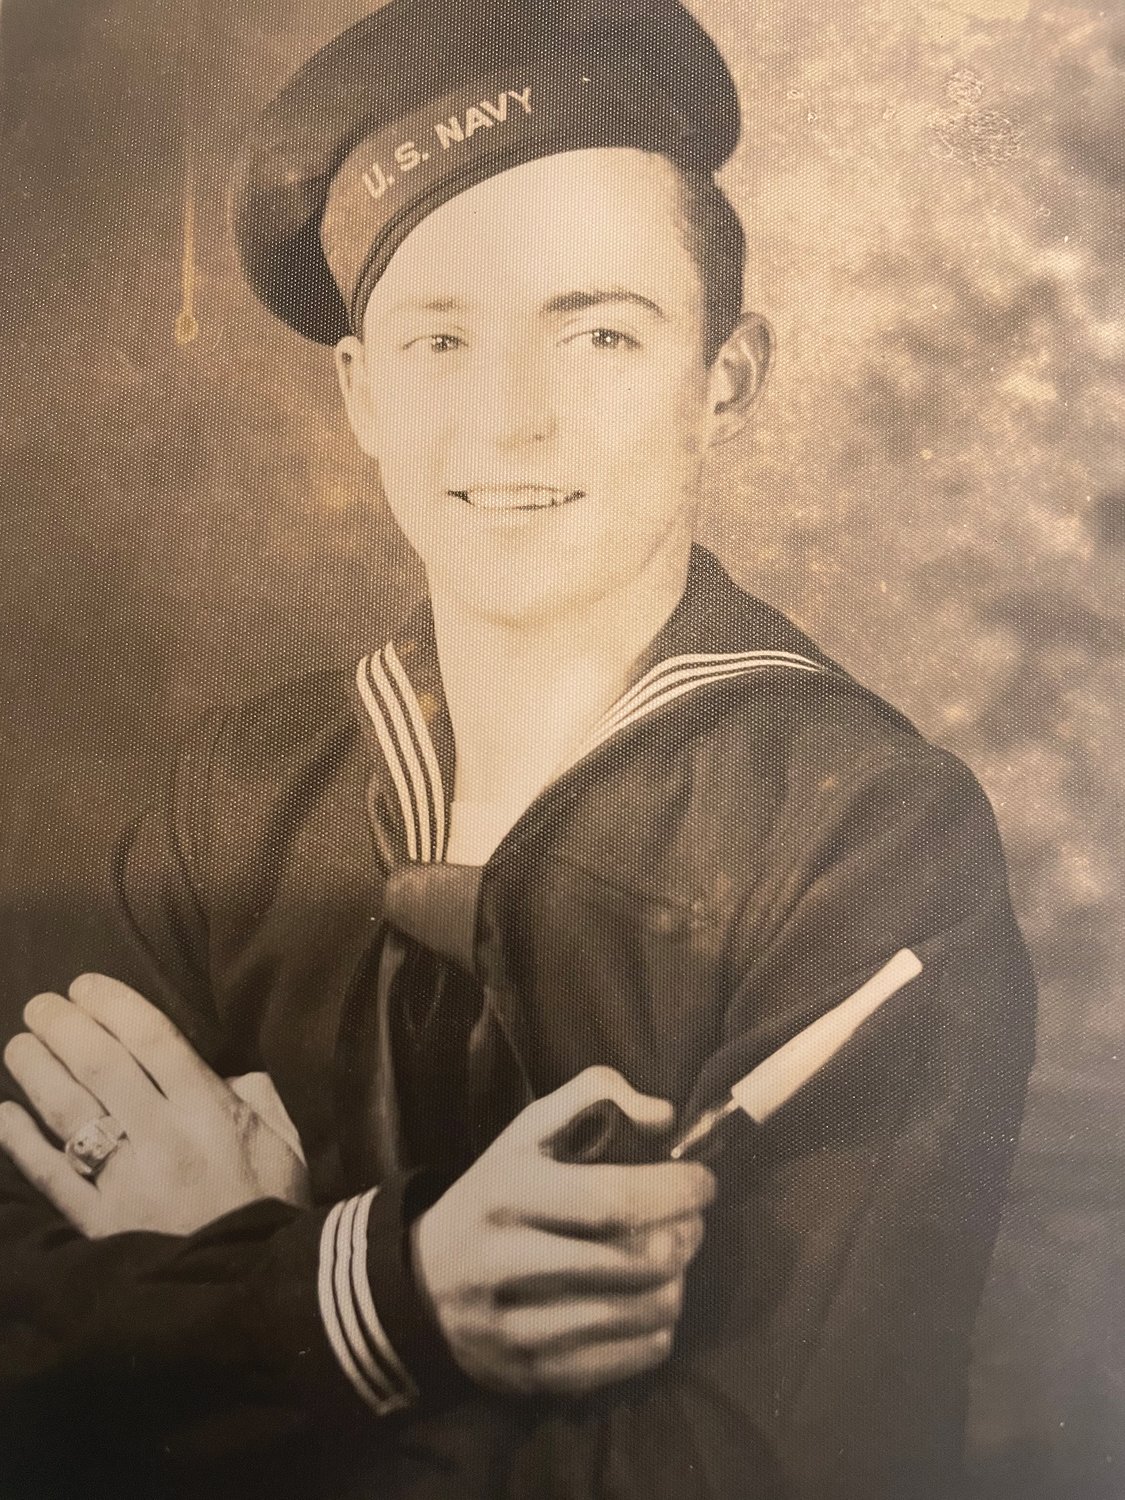 Robert Stefanko’s dad made him join the Navy on his 17th birthday.